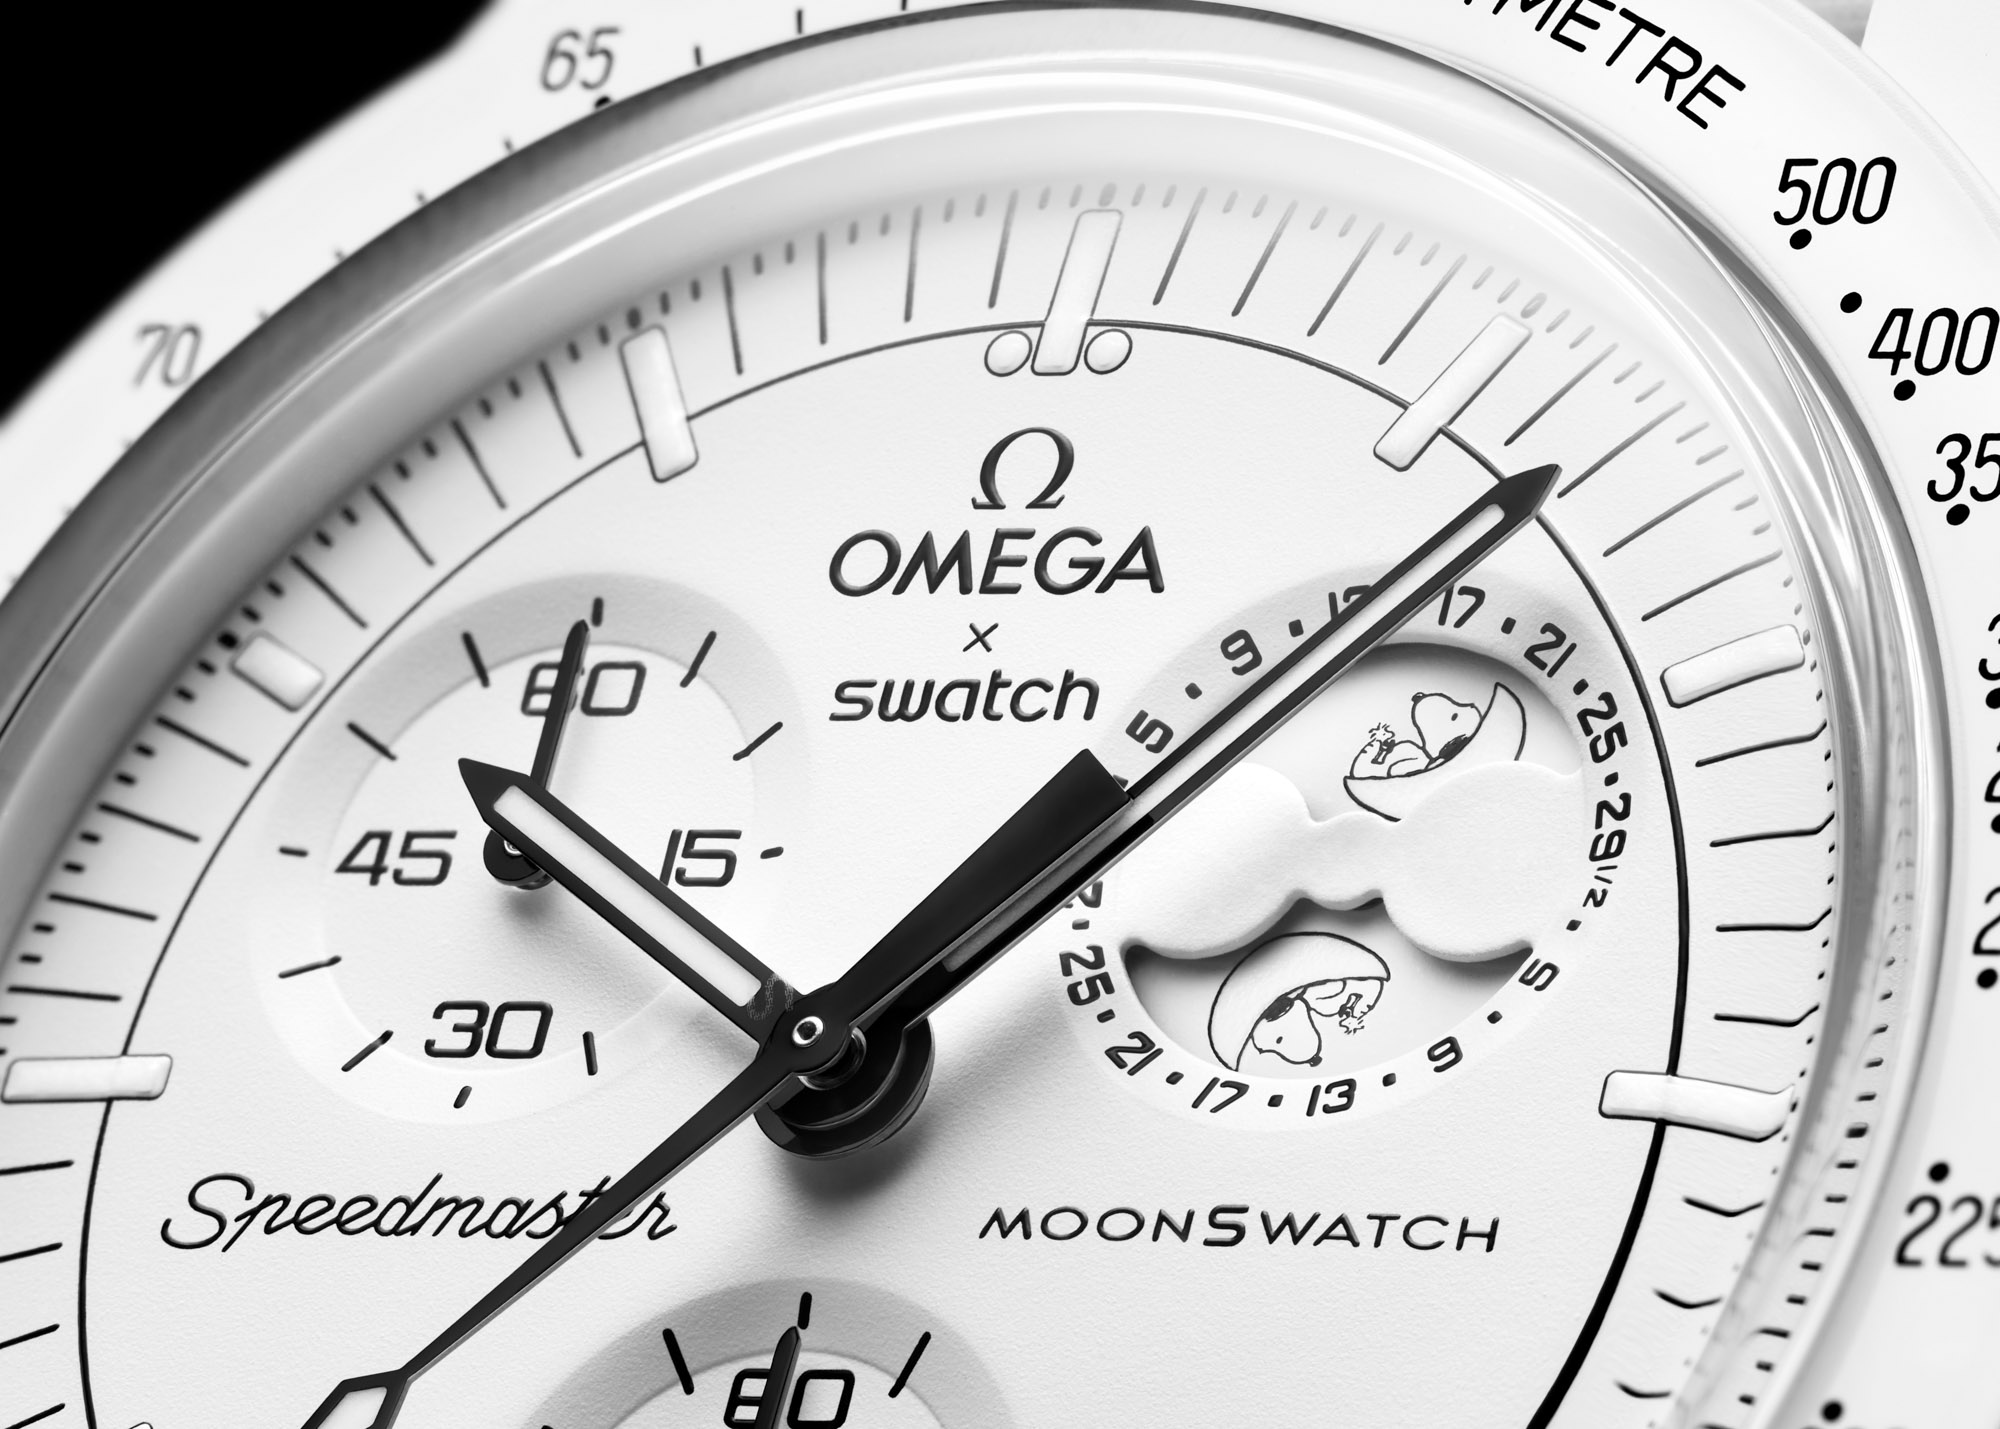 swatch mission to moonphase moonswatch speedmaster bioceramic omega swatch snoopy peanuts crop 11